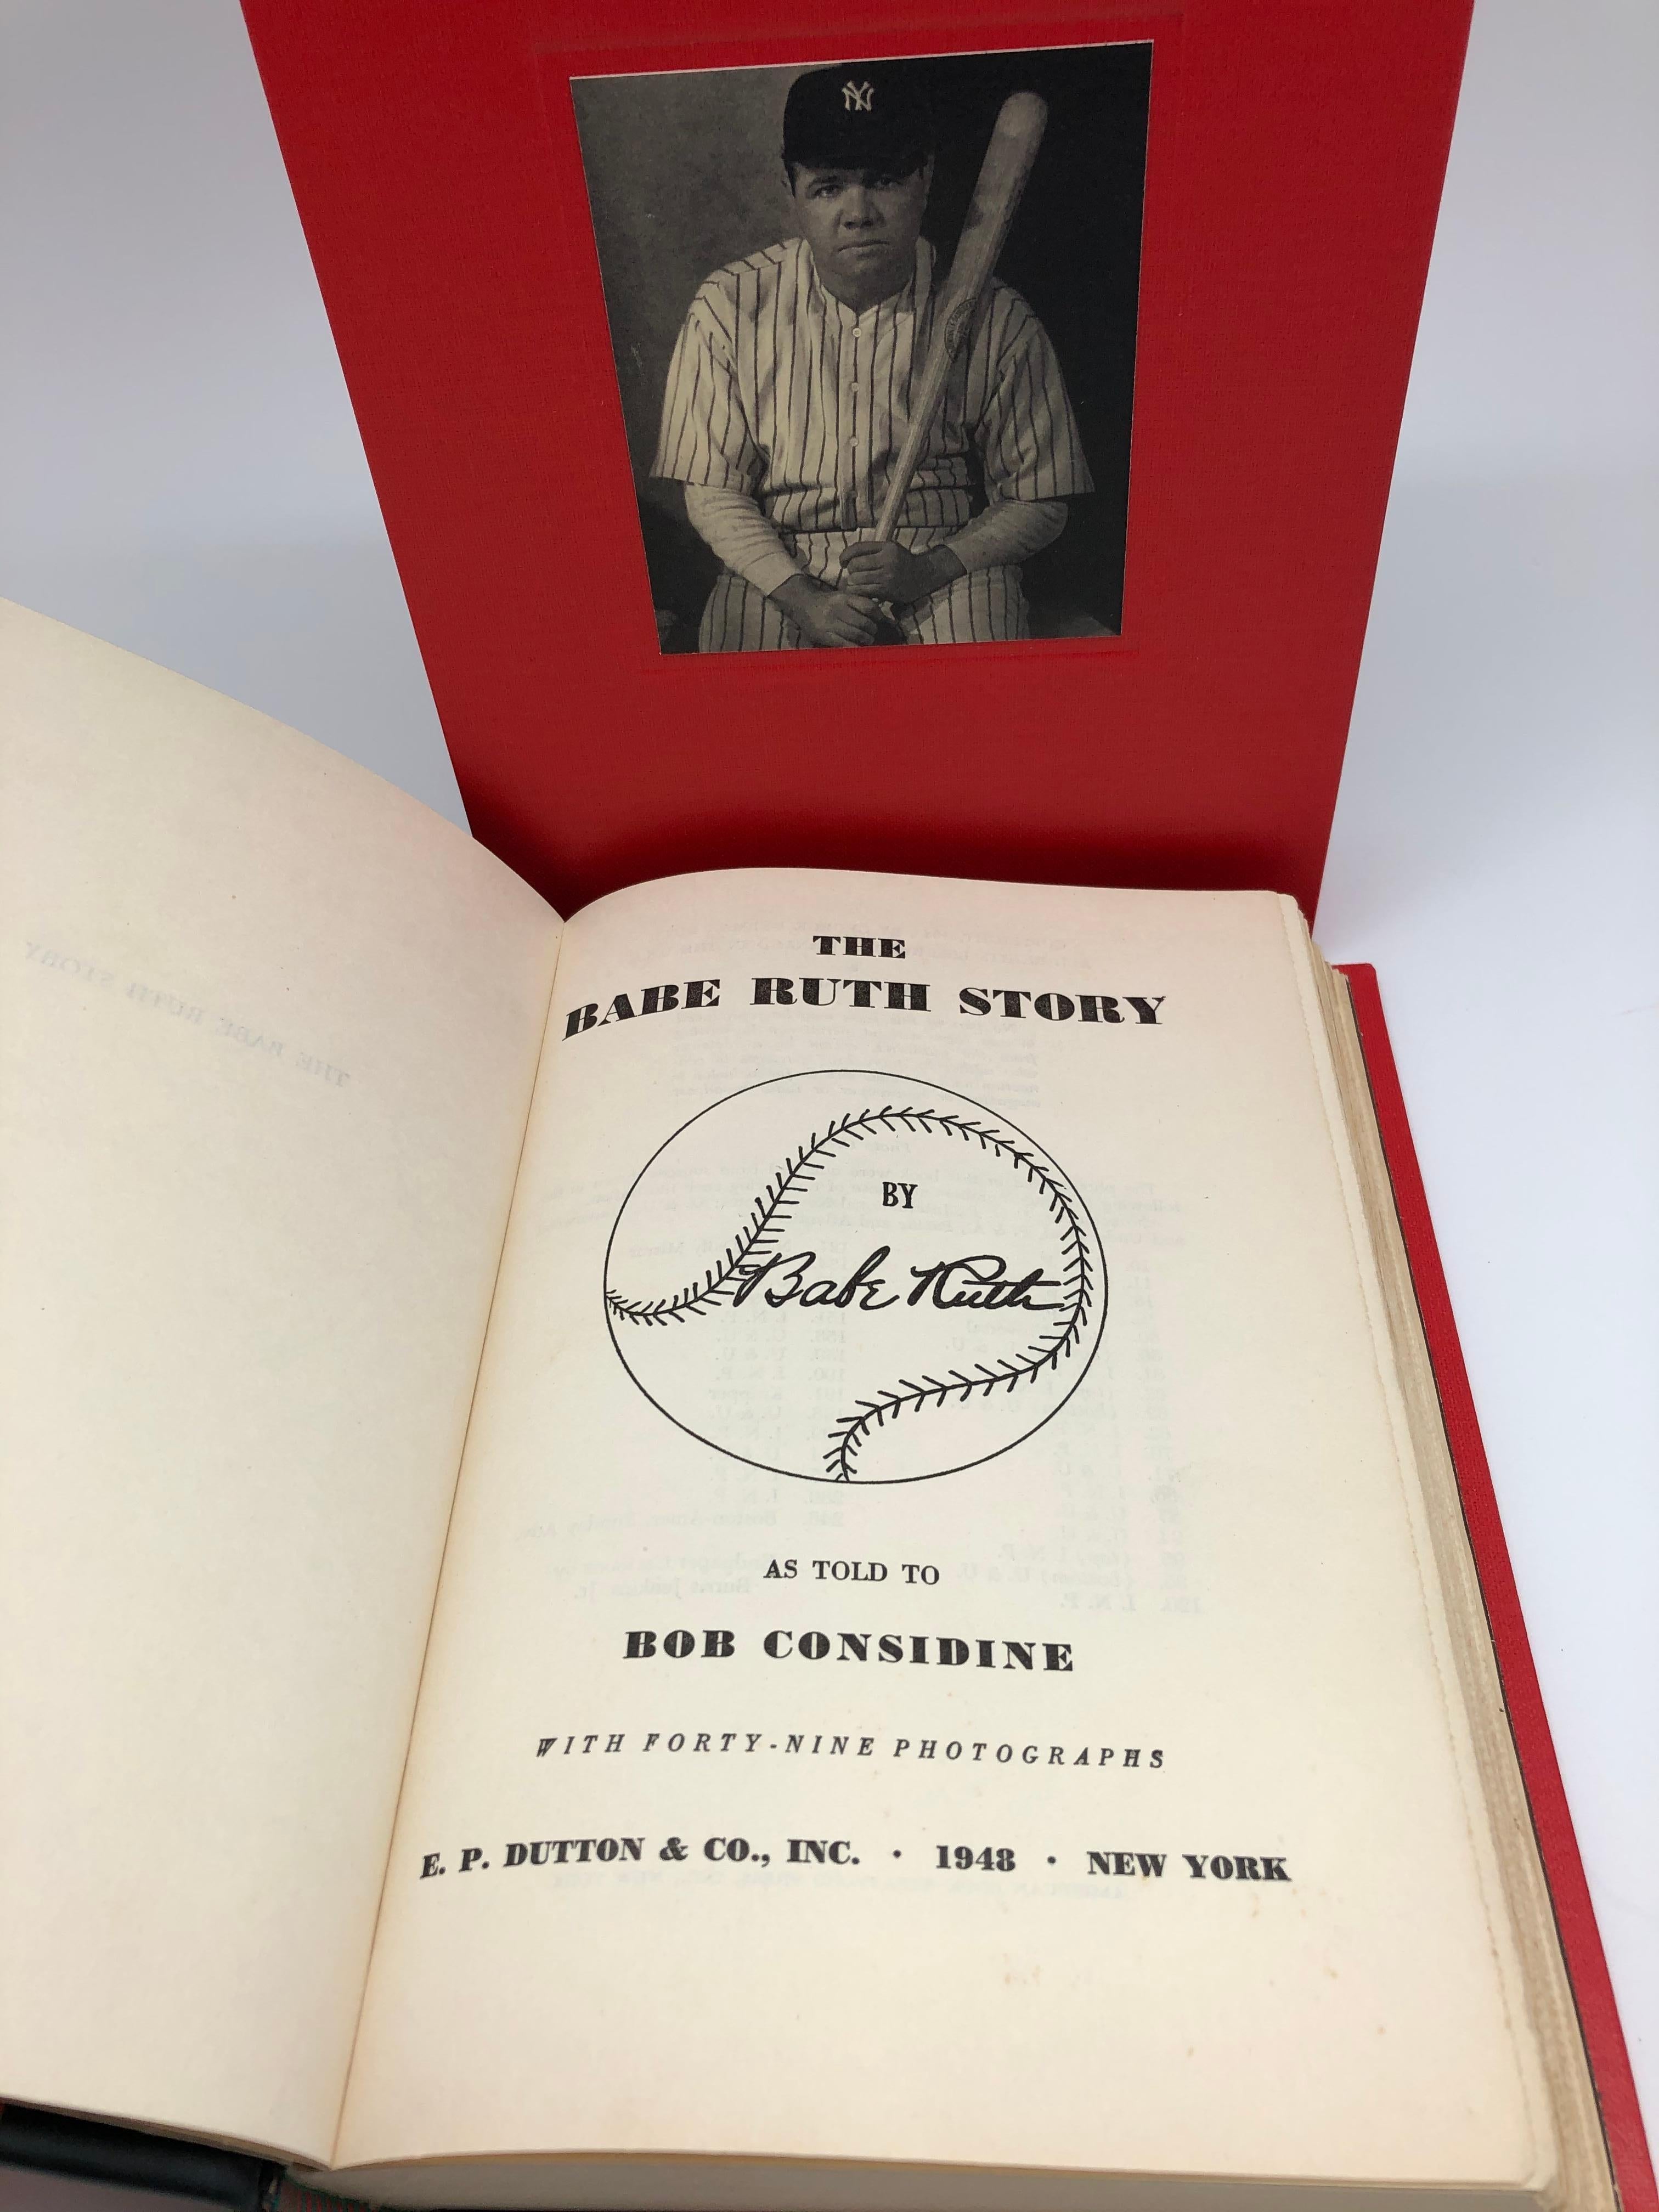 Ruth, Babe and Bob Considine. The Babe Ruth Story. New York: E. P. Dutton & Co., 1948. Rebound and presented in a custom archival slipcase.

Presented is a first edition of The Babe Ruth Story written by Babe Ruth and Bob Considine. The book was